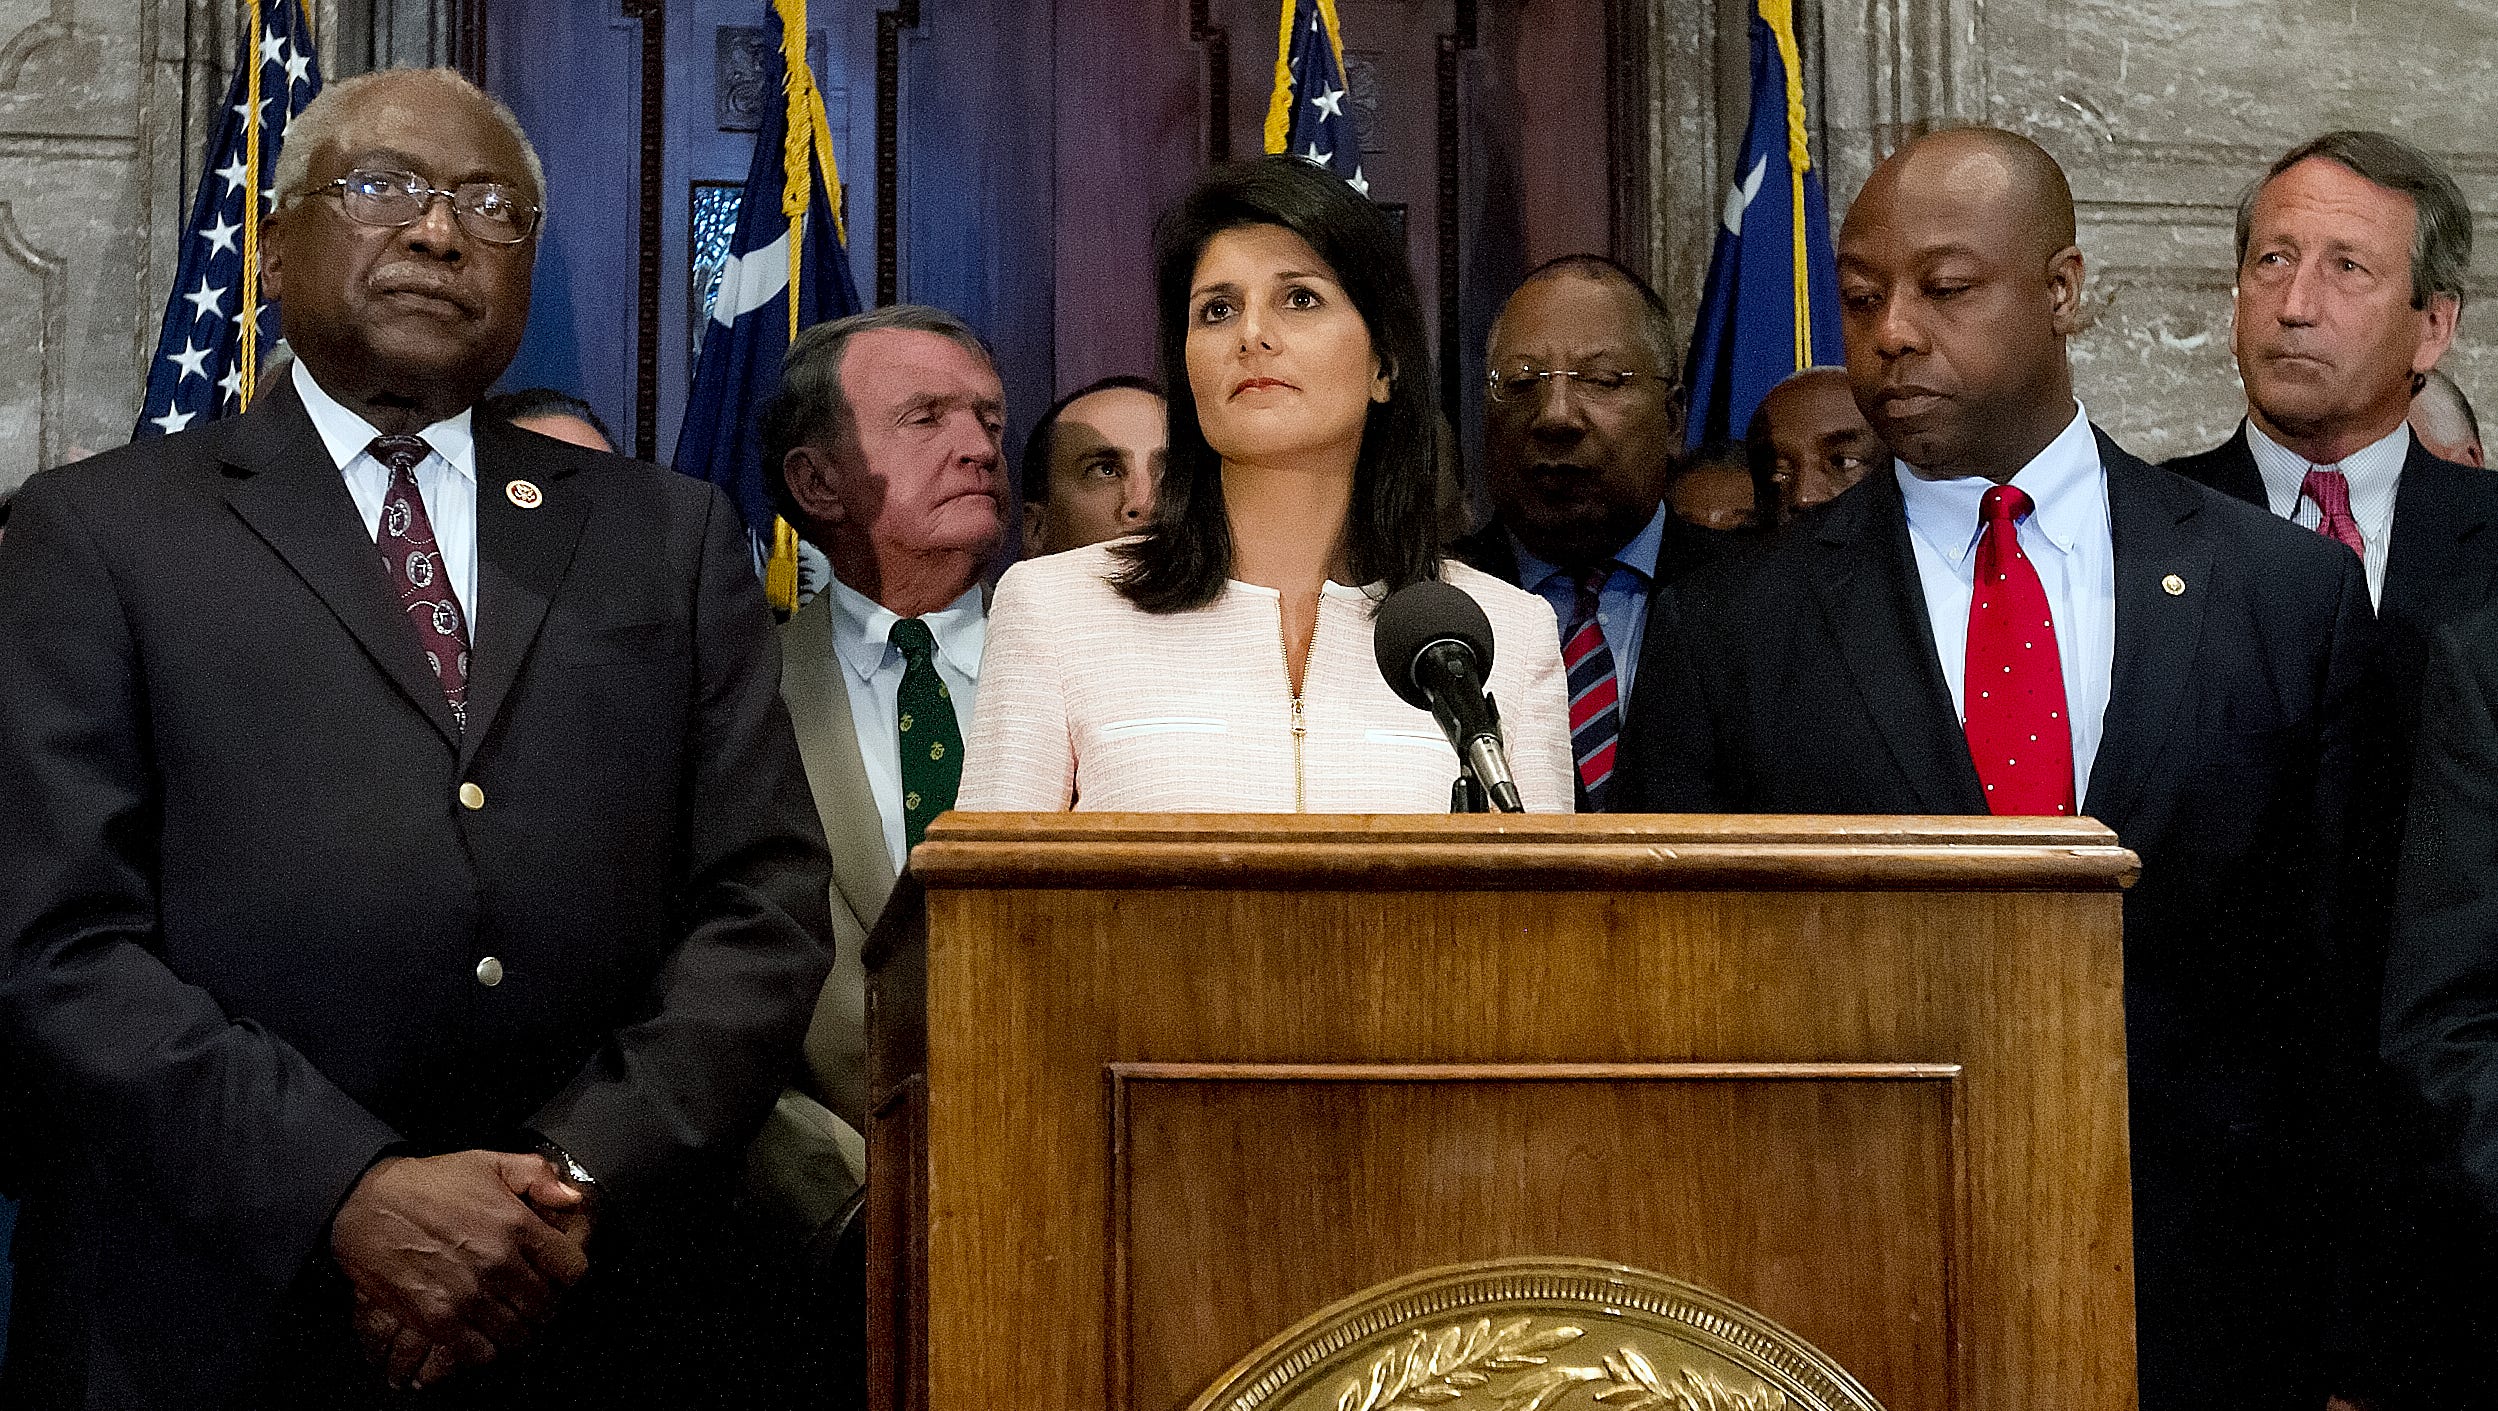 History behind Confederate flag at South Carolina's statehouse and Nikki Haley's role in removing it